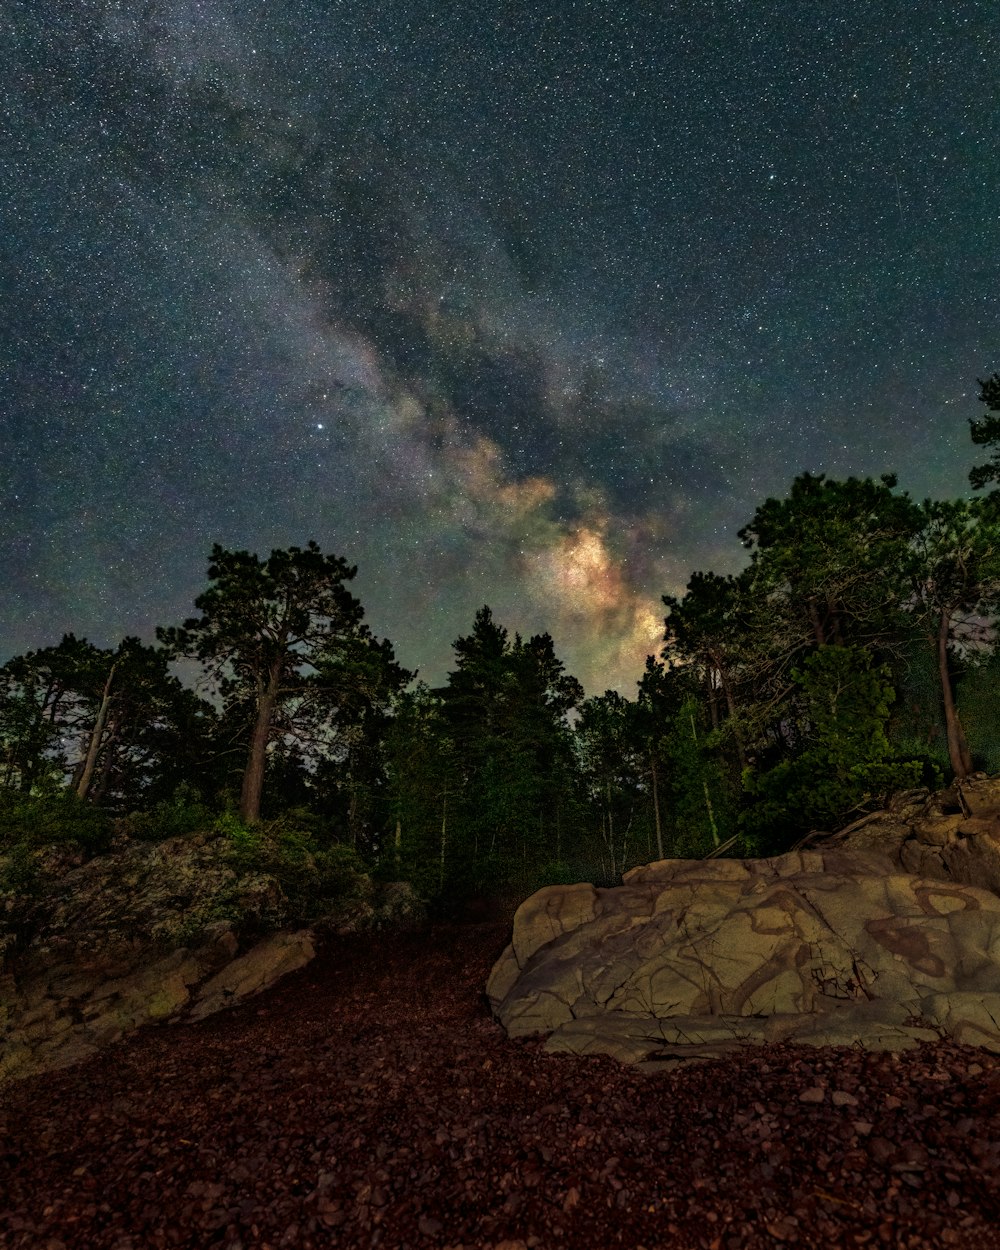 a rocky area with trees and stars in the sky